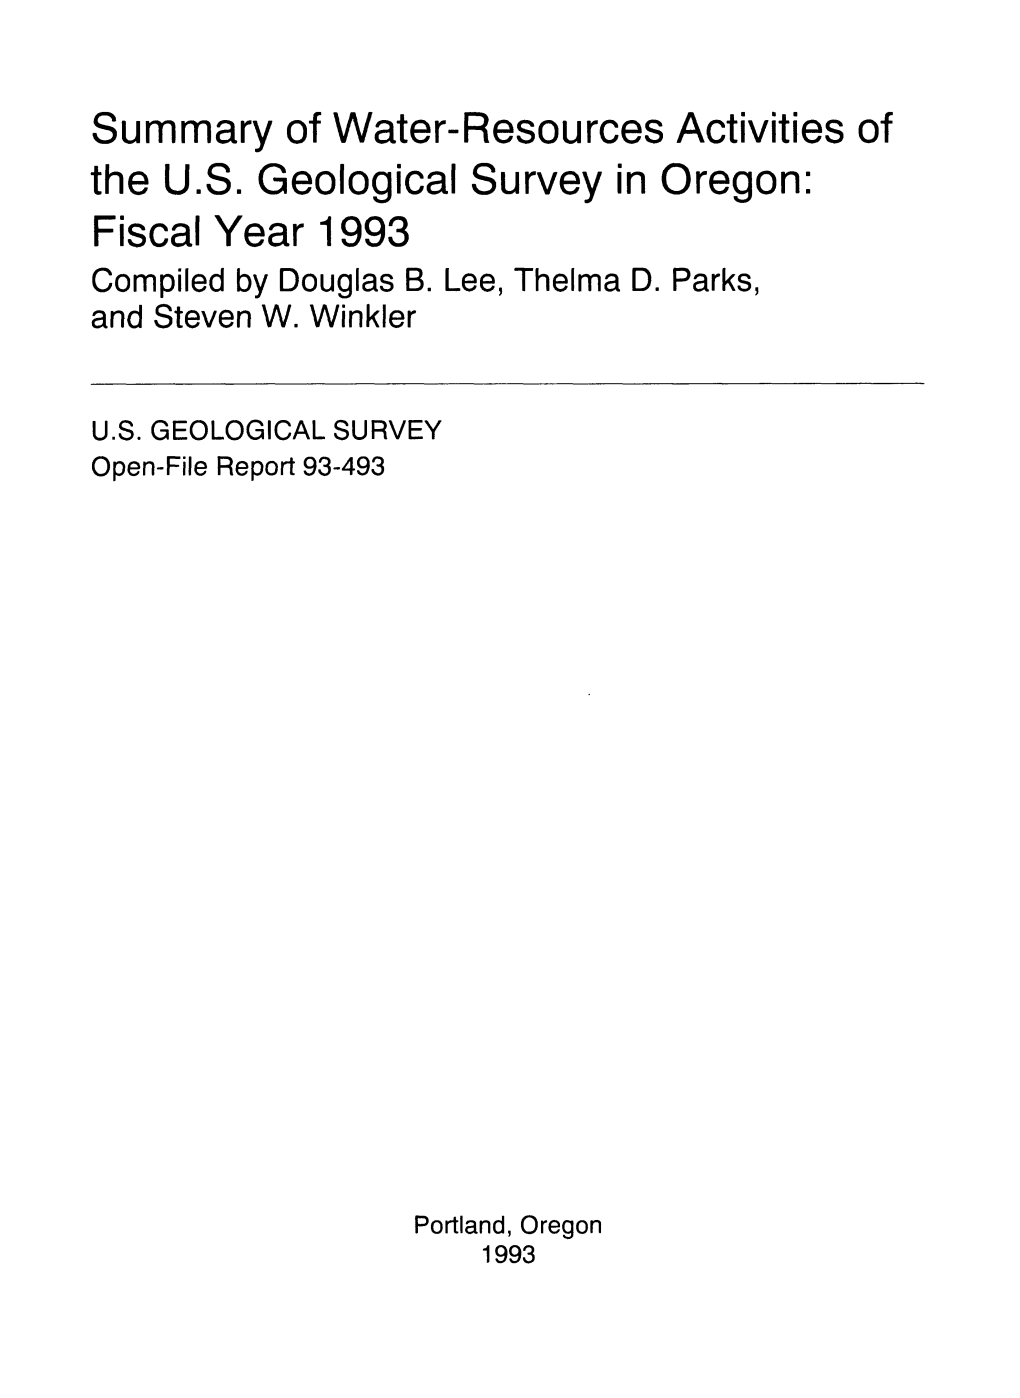 Summary of Water-Resources Activities of the U.S. Geological Survey in Oregon: Fiscal Year 1993 Compiled by Douglas B